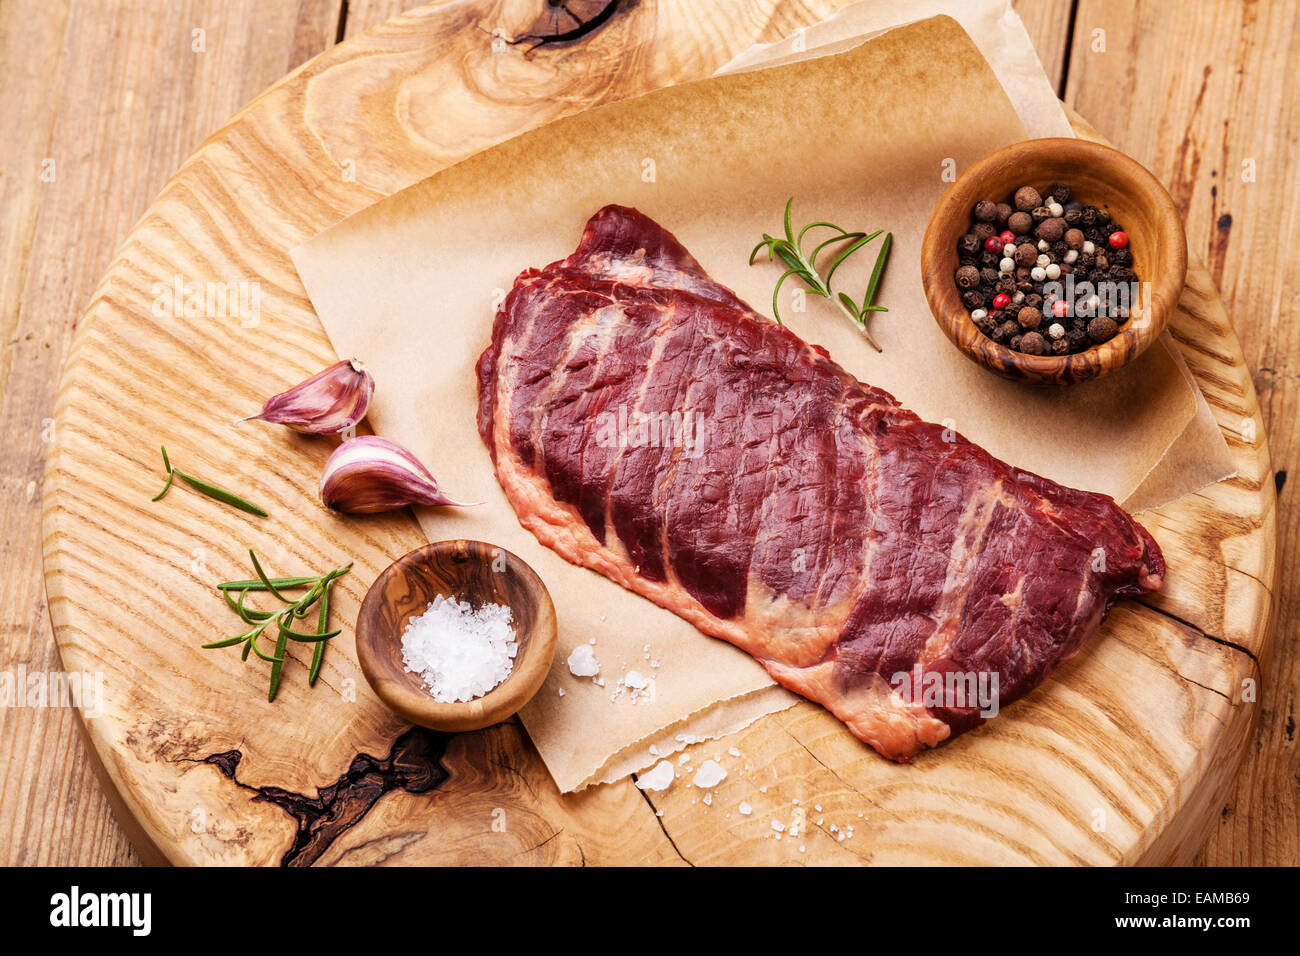 Raw fresh meat Steak Machete with salt and pepper on wooden background Stock Photo